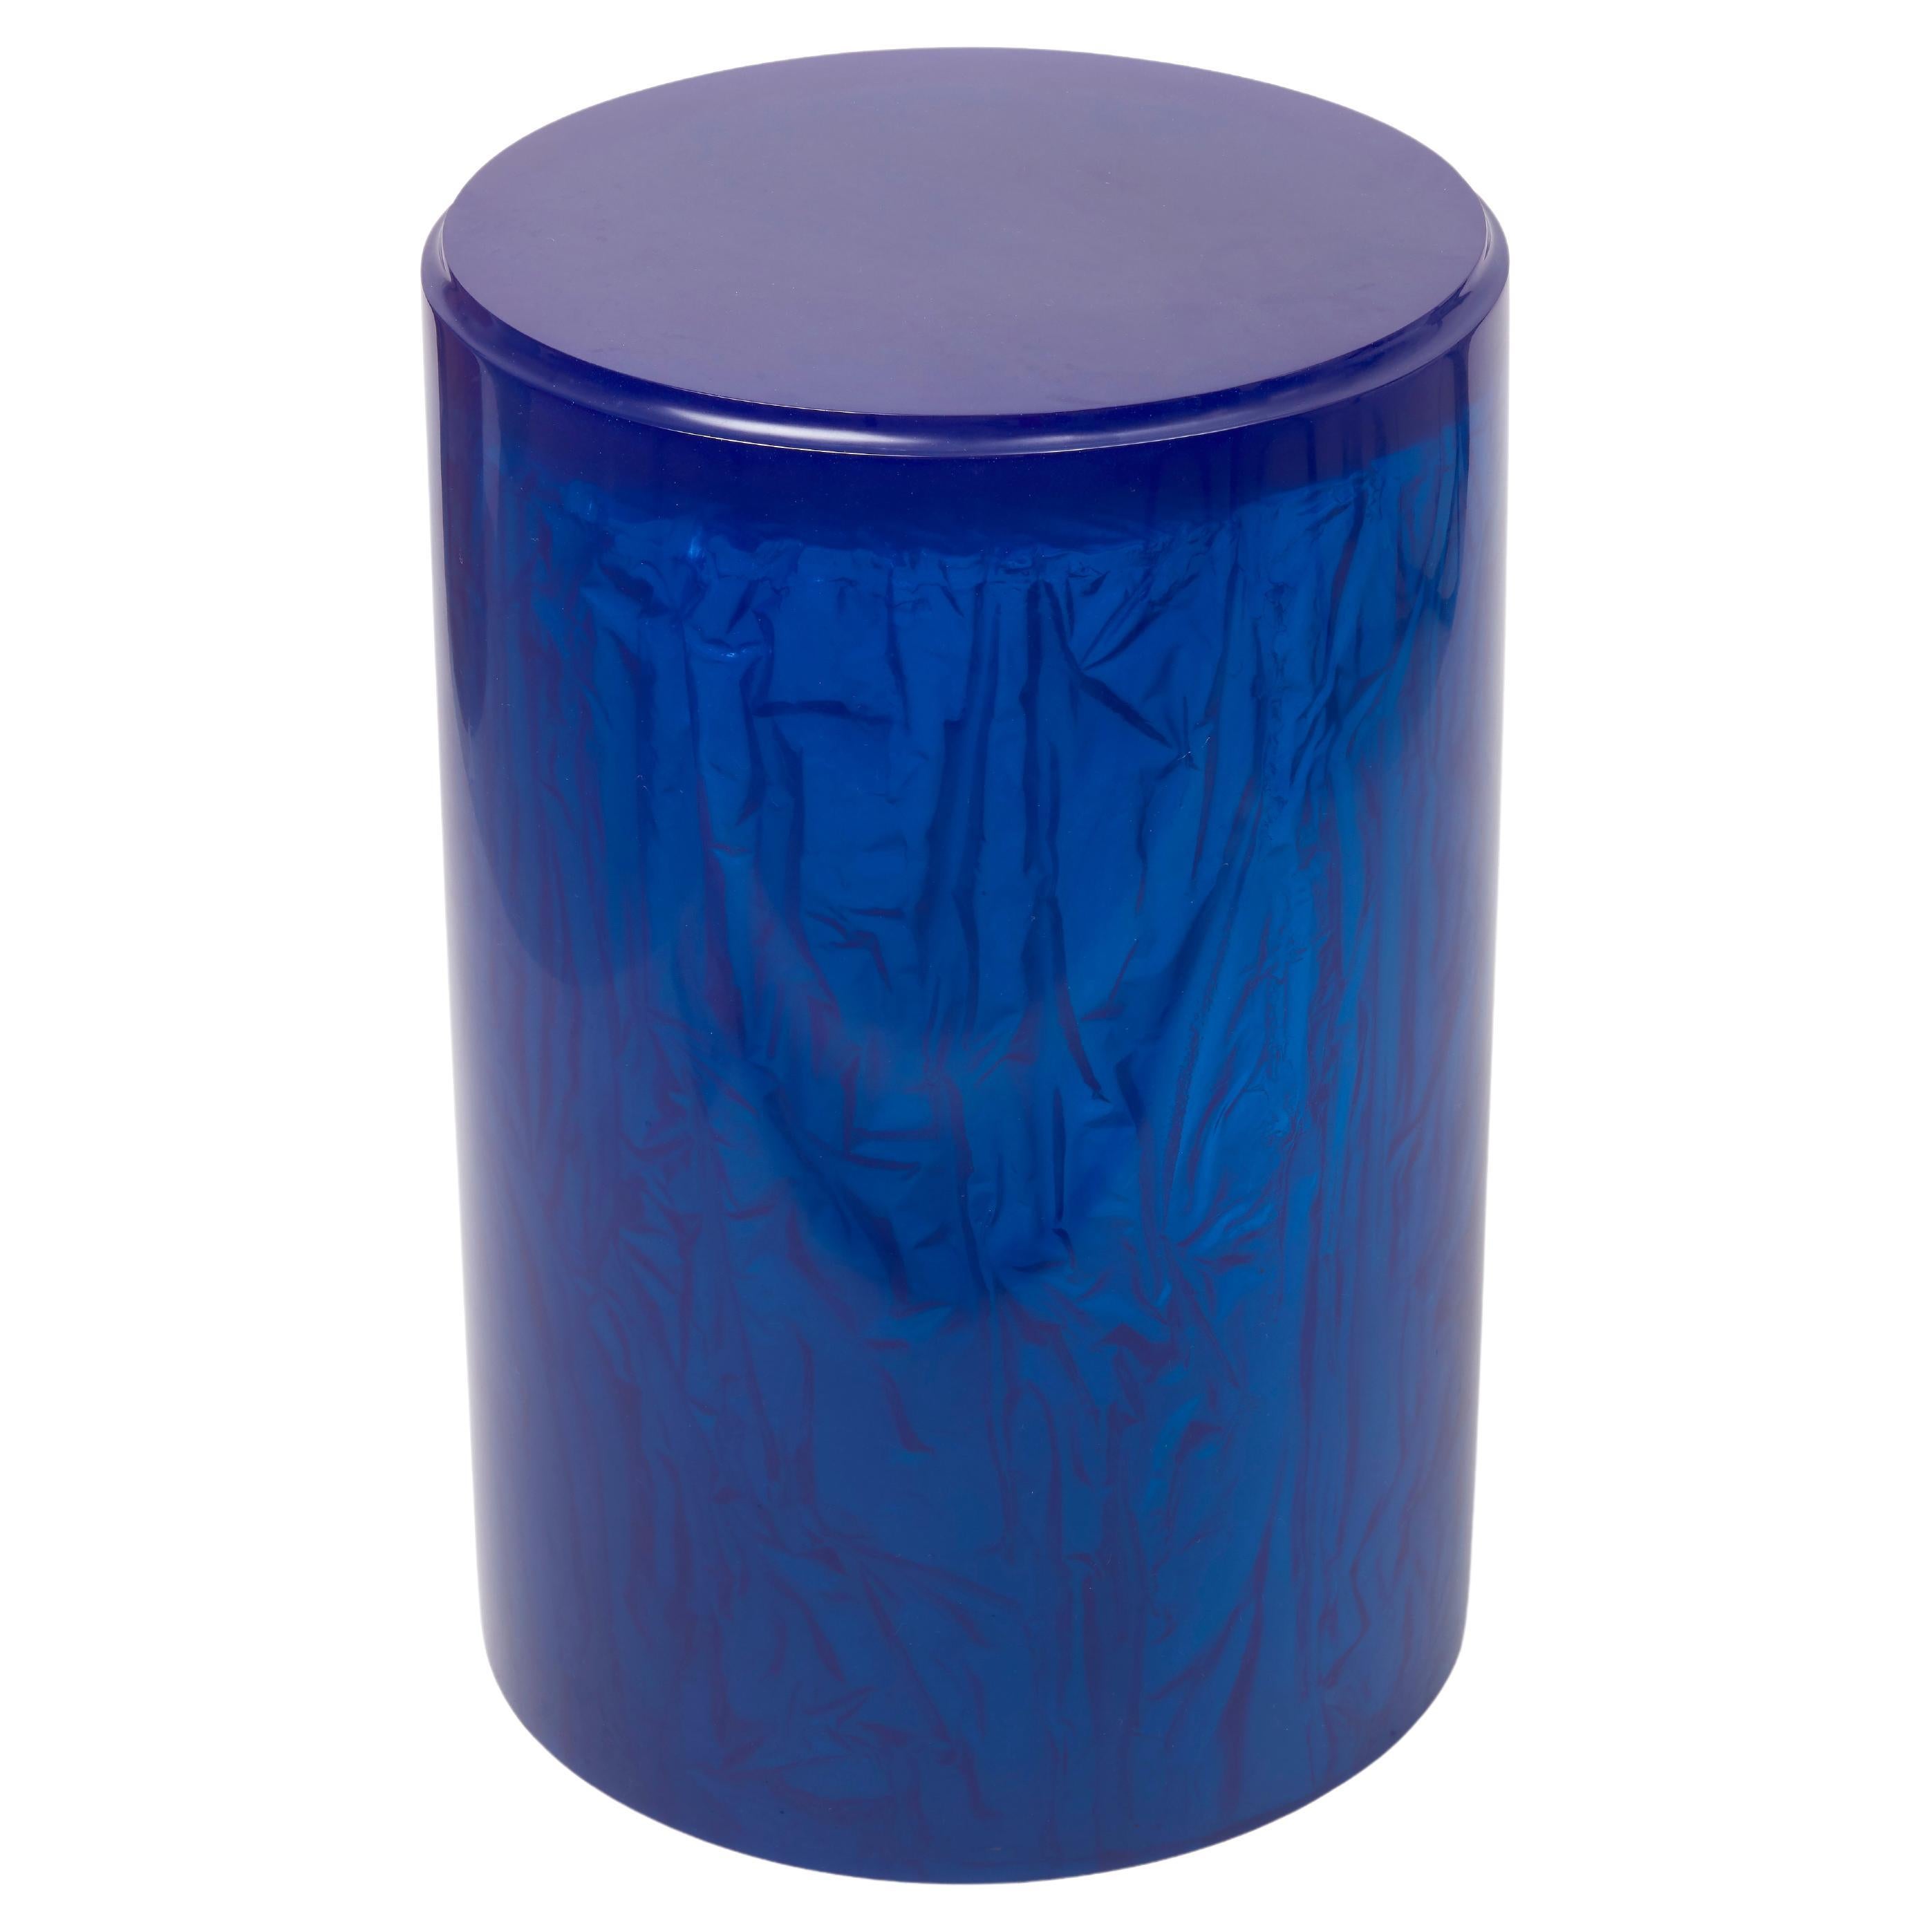 Contemporary Resin Acrylic Side Table or Stool by Natalie Tredgett, Cobalt Blue For Sale